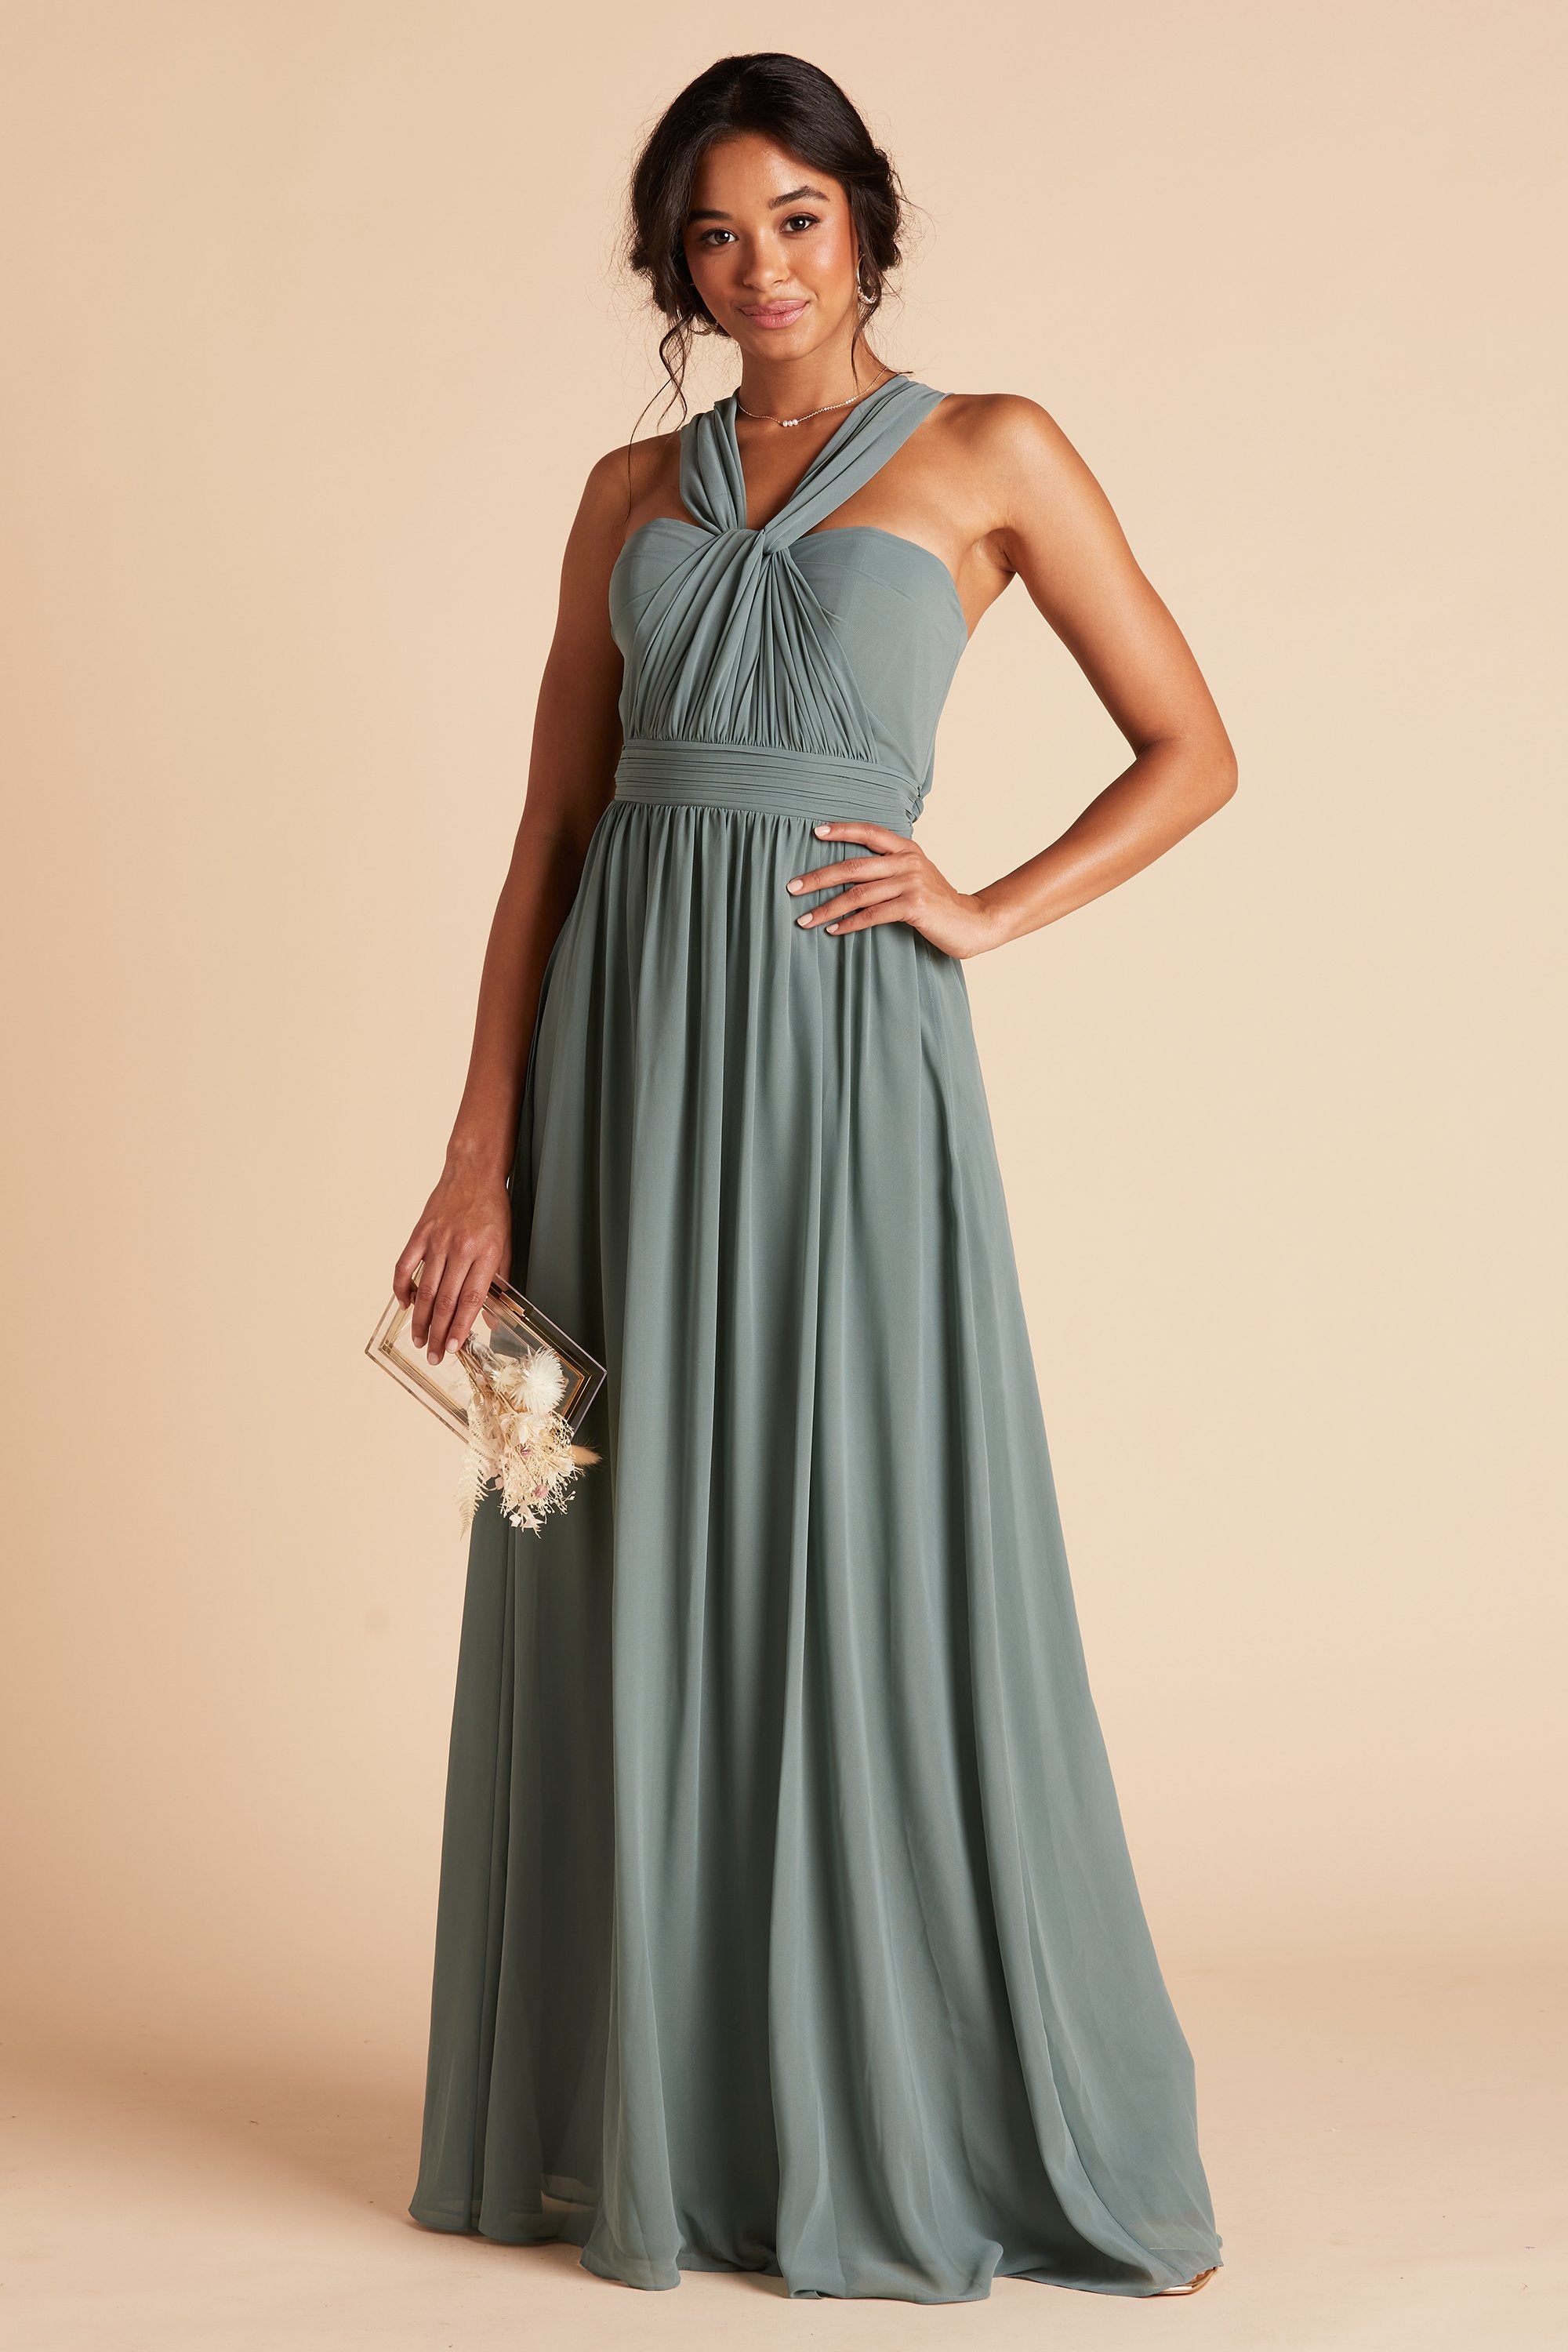 Front view of Grace Convertible Dress in sea glass chiffon worn by a slender model with a medium skin tone. Front streamers are tied at the center of the sweetheart neckline, then pulled back over each shoulder to form an x-neckline.